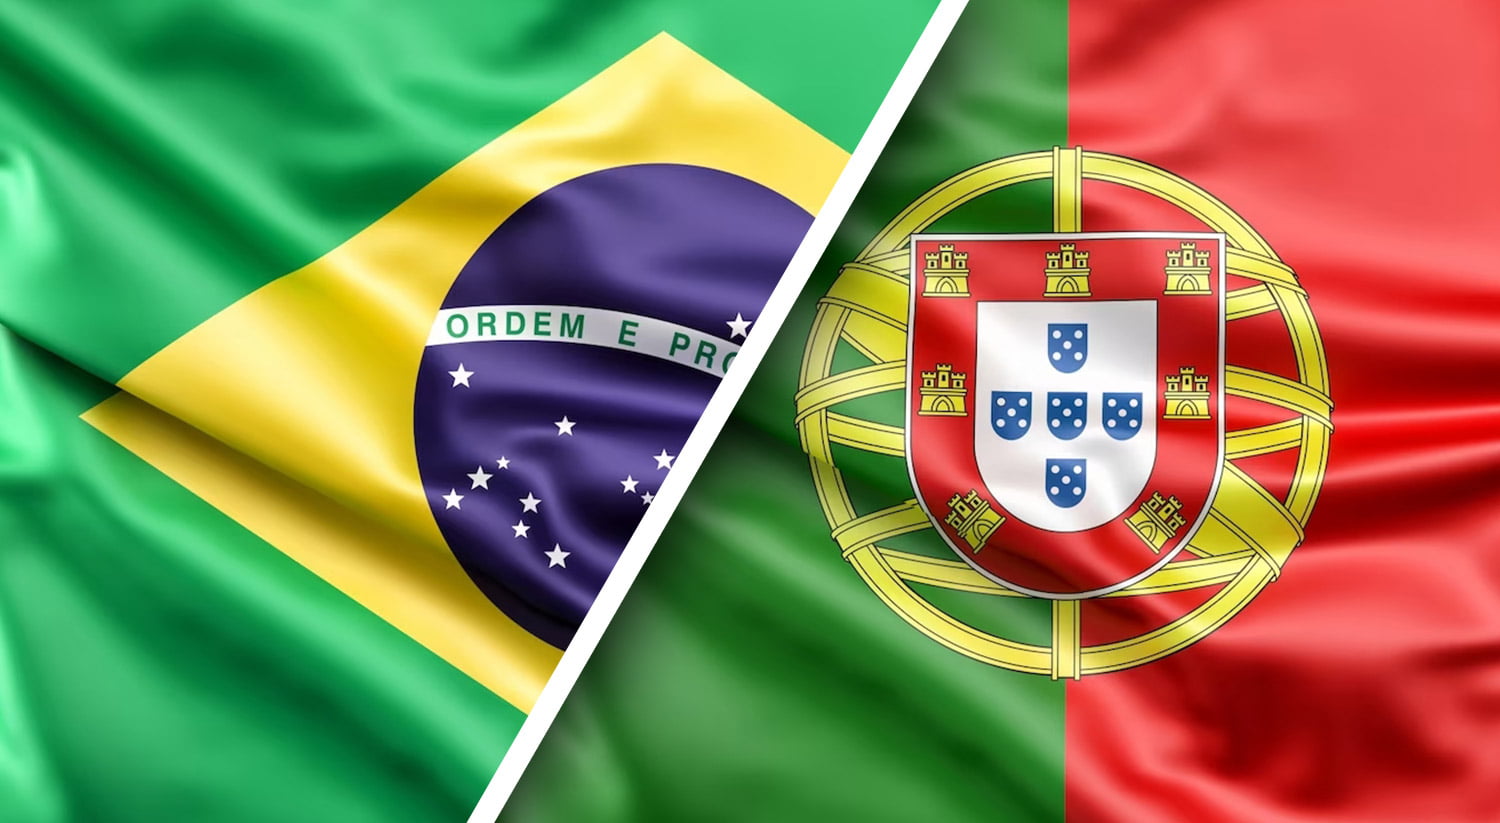 Differences Between Brazilian and European Portuguese